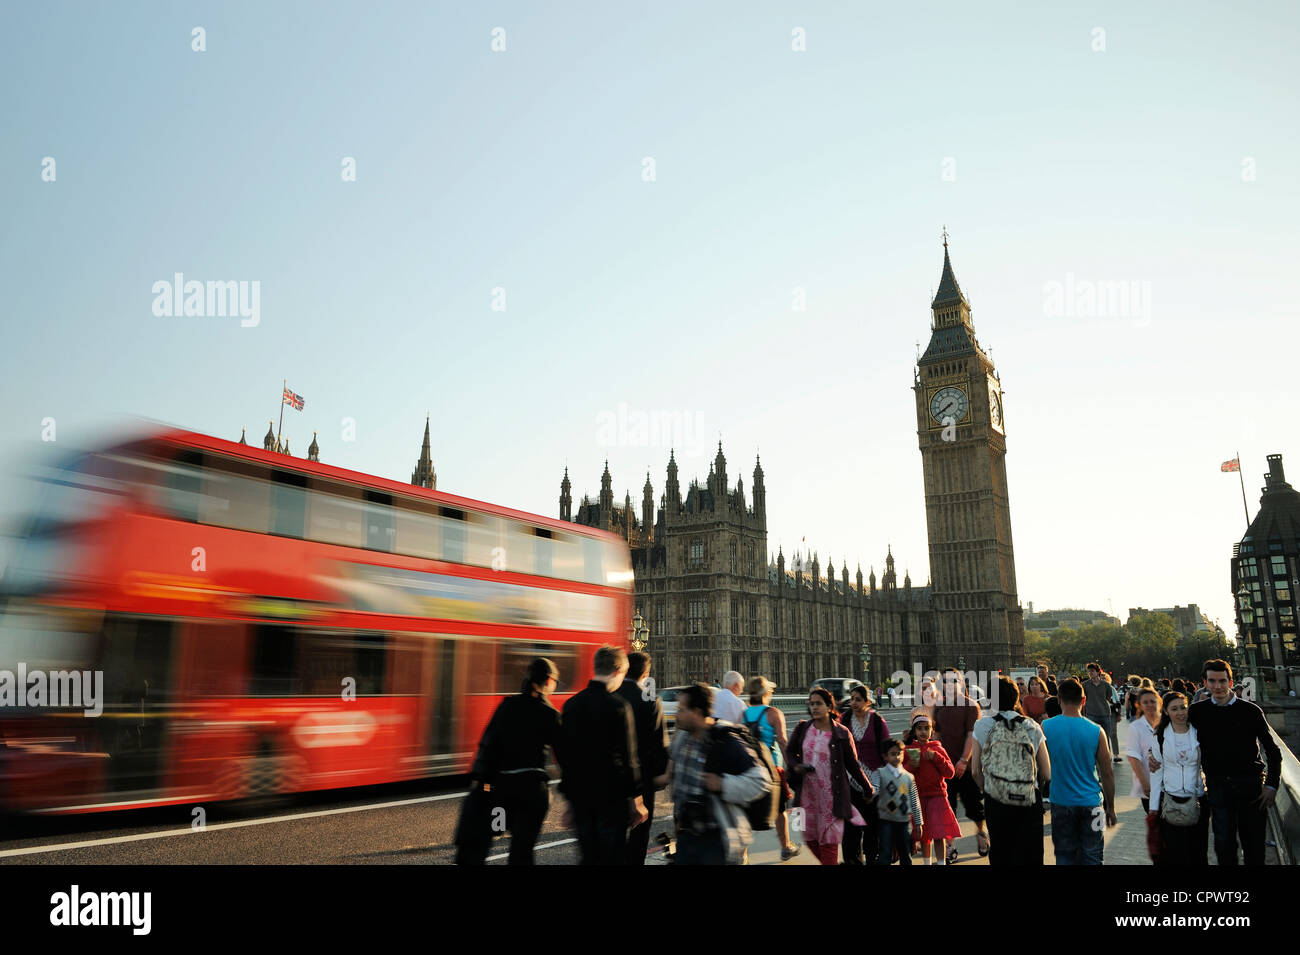 Crowds of people and a red London bus cross Westminster bridge in front of Big Ben Stock Photo